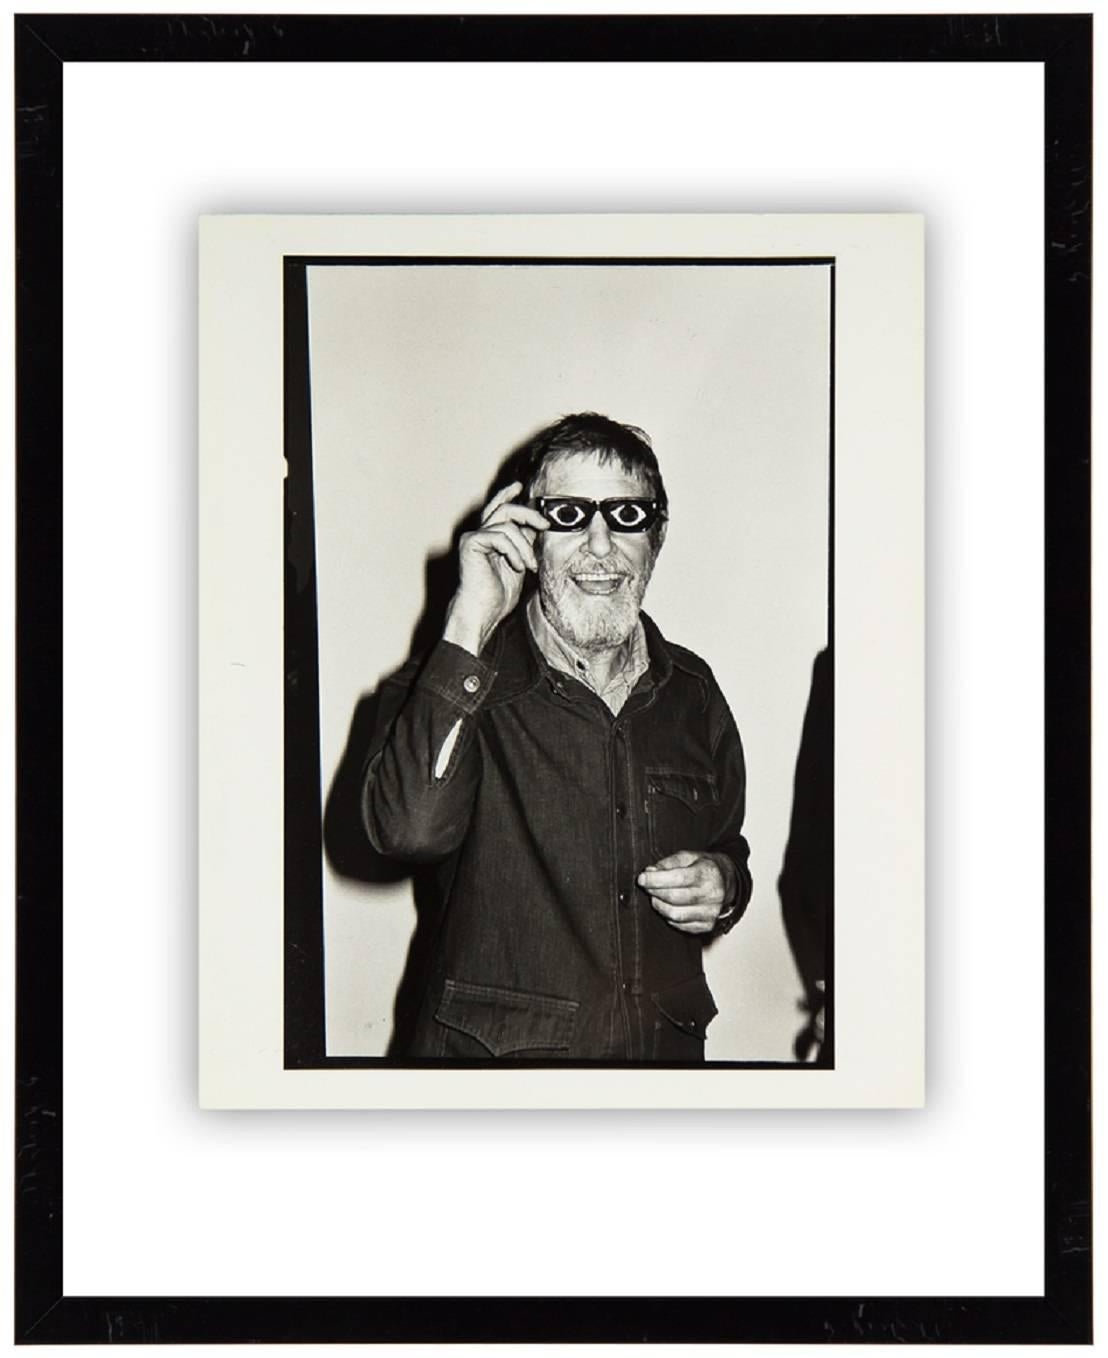 Fred McDarrah Black and White Photograph - John Cage, 1977, Vintage Silver Gelatin Signed Photograph